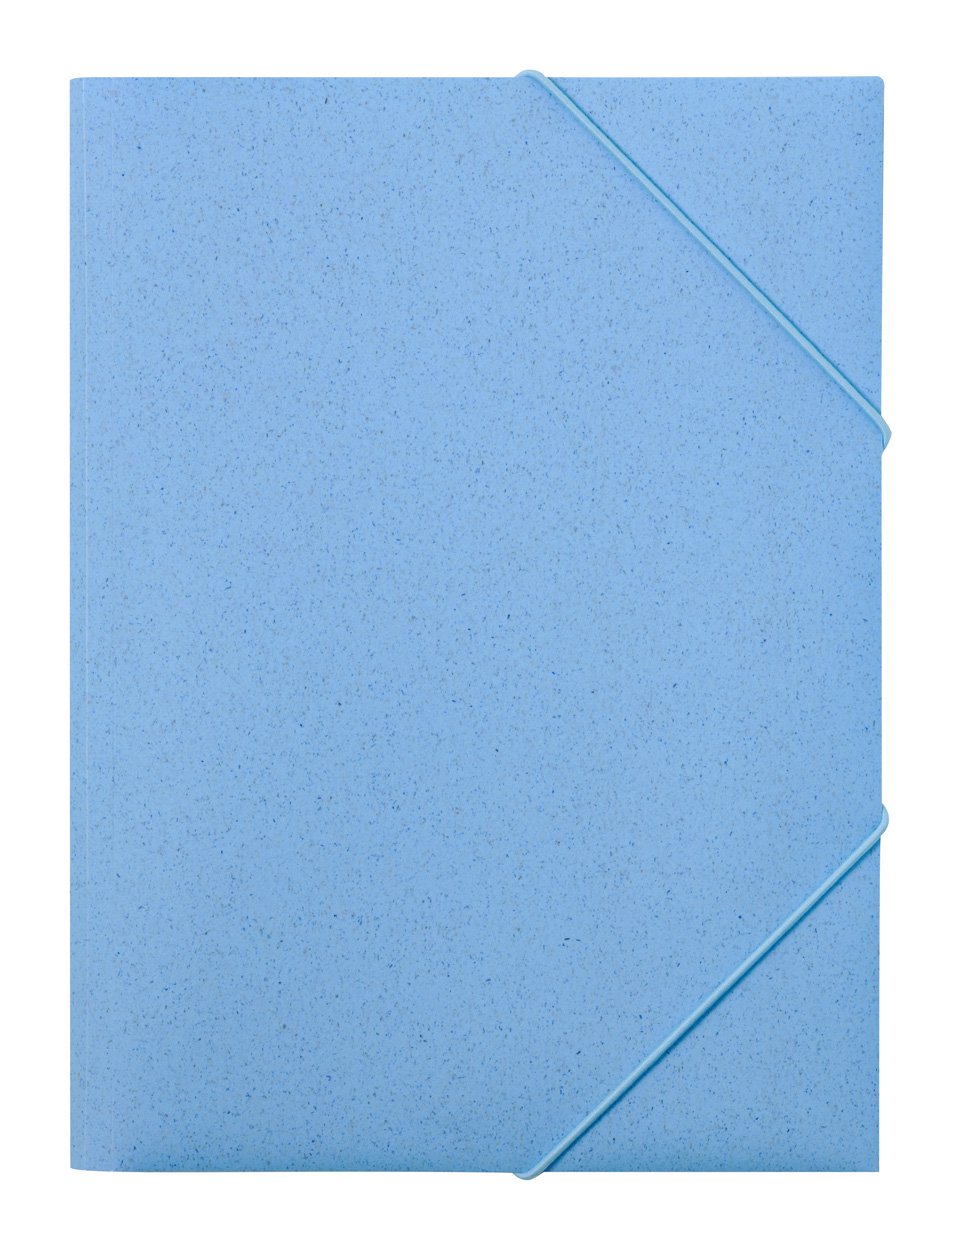 Quixar style for documents - blue